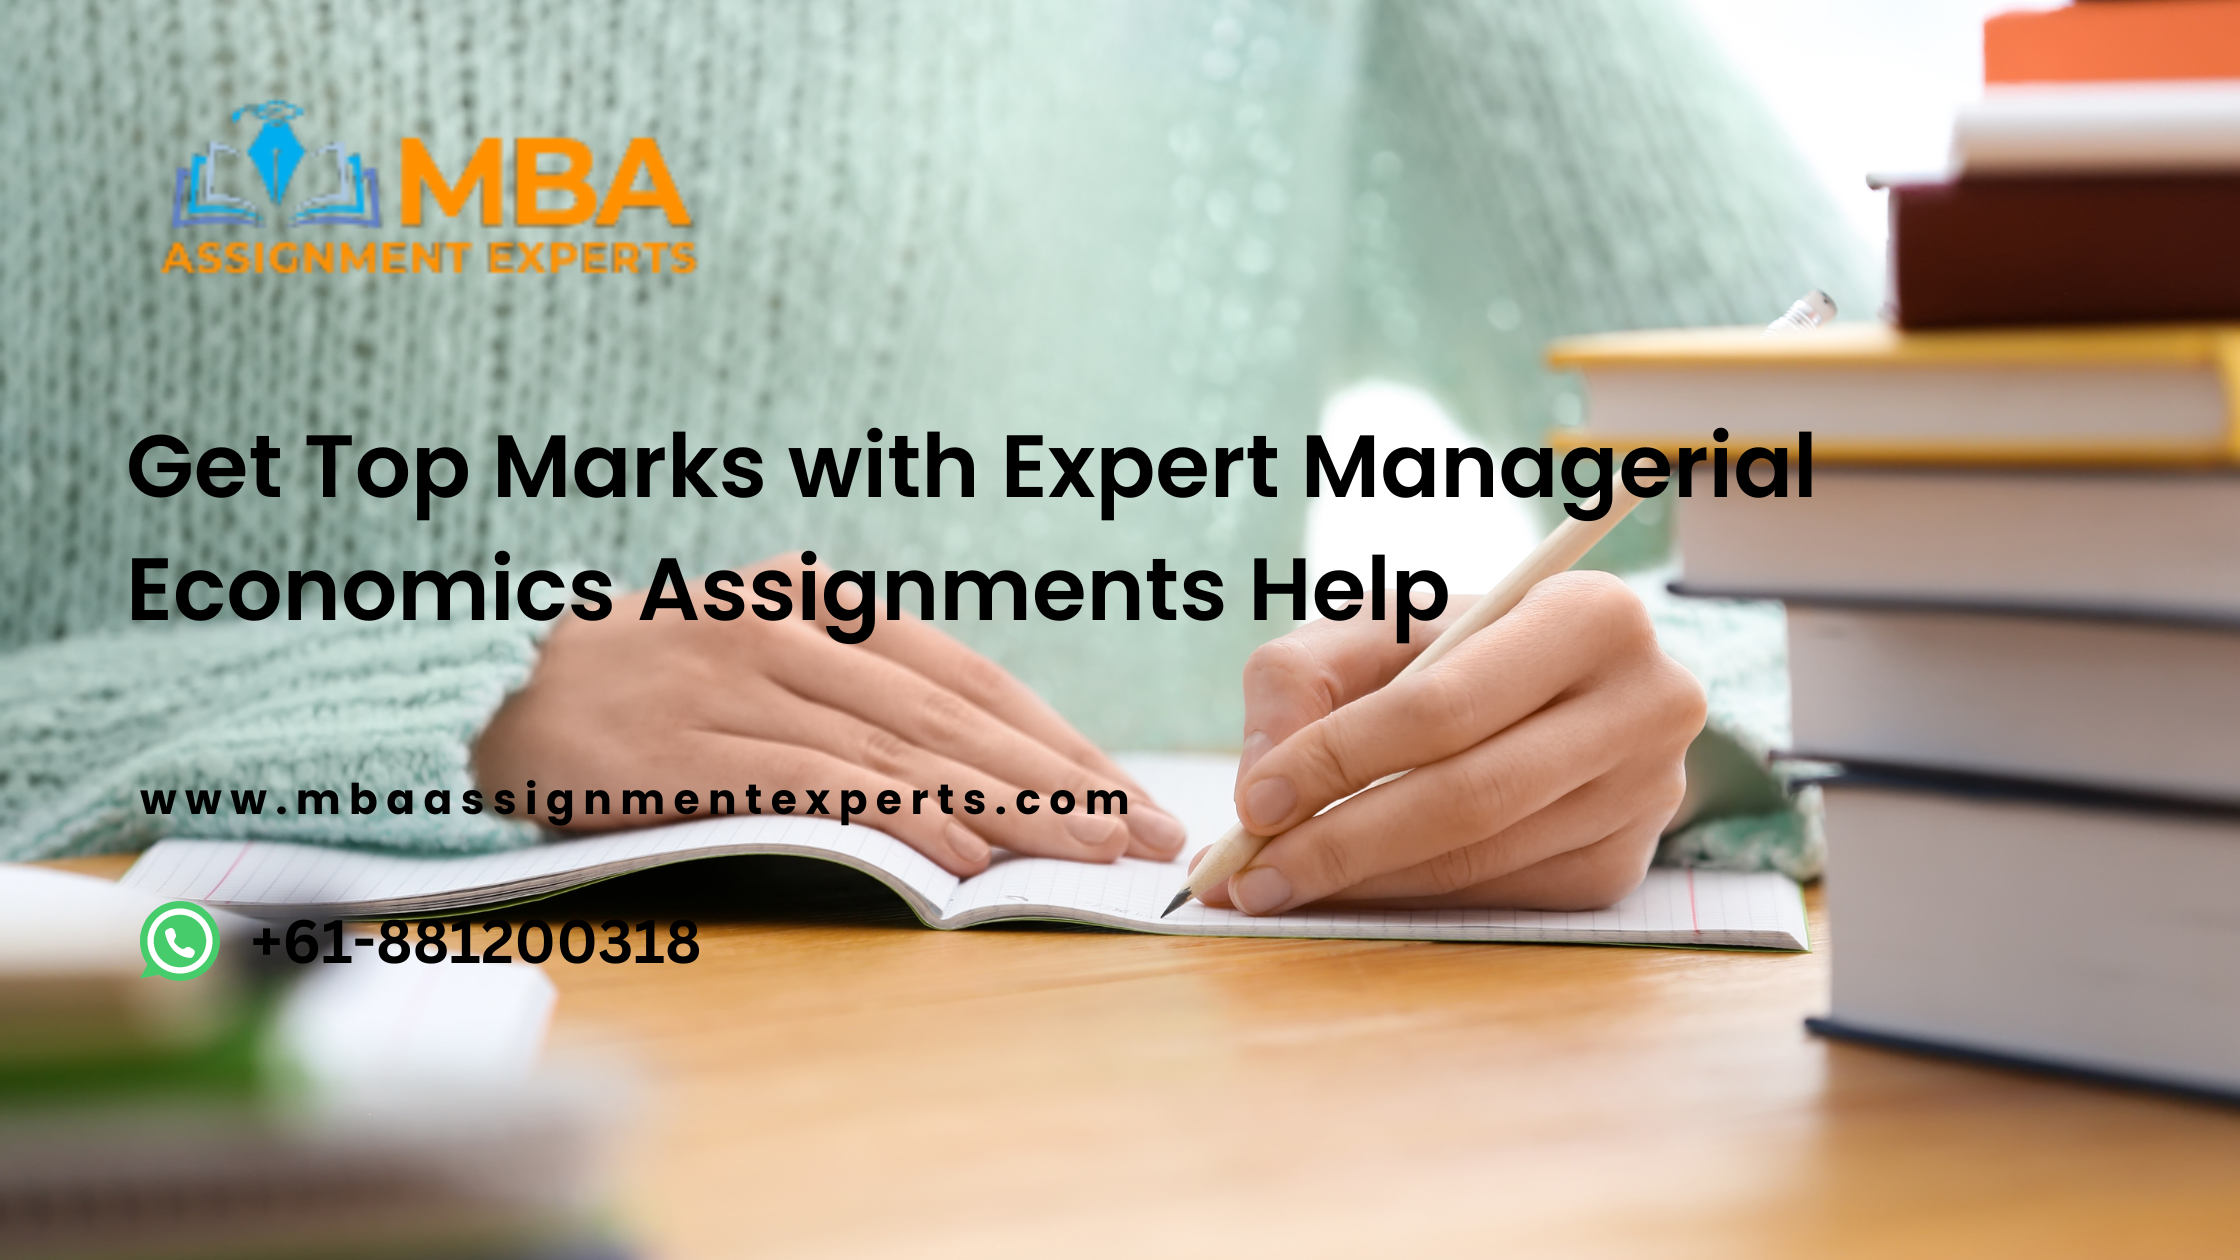 Get Top Marks with Expert Managerial Economics Assignments Help